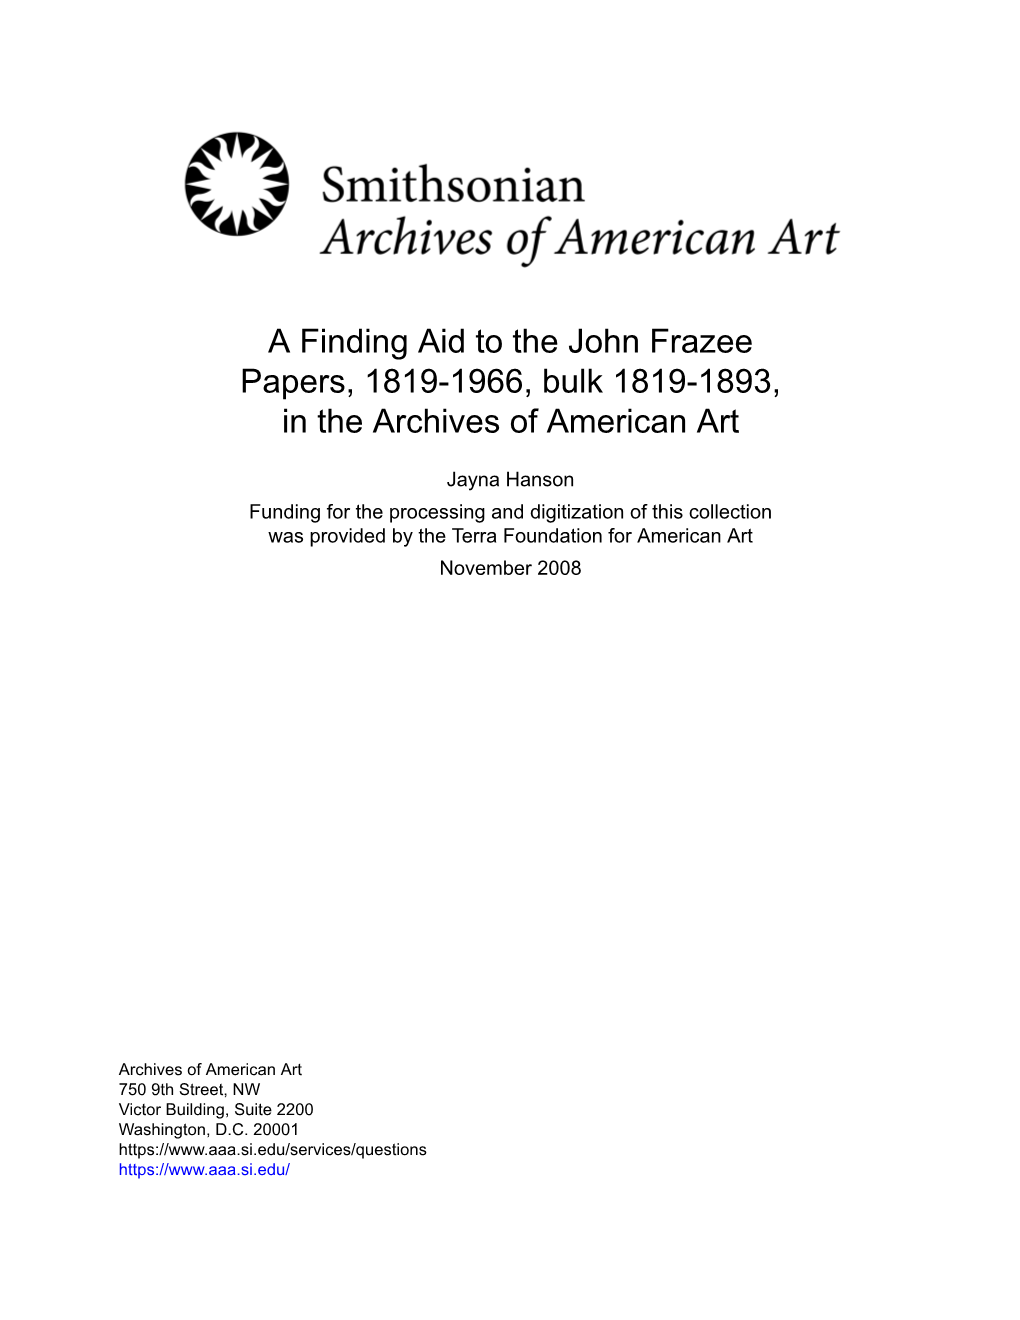 A Finding Aid to the John Frazee Papers, 1819-1966, Bulk 1819-1893, in the Archives of American Art